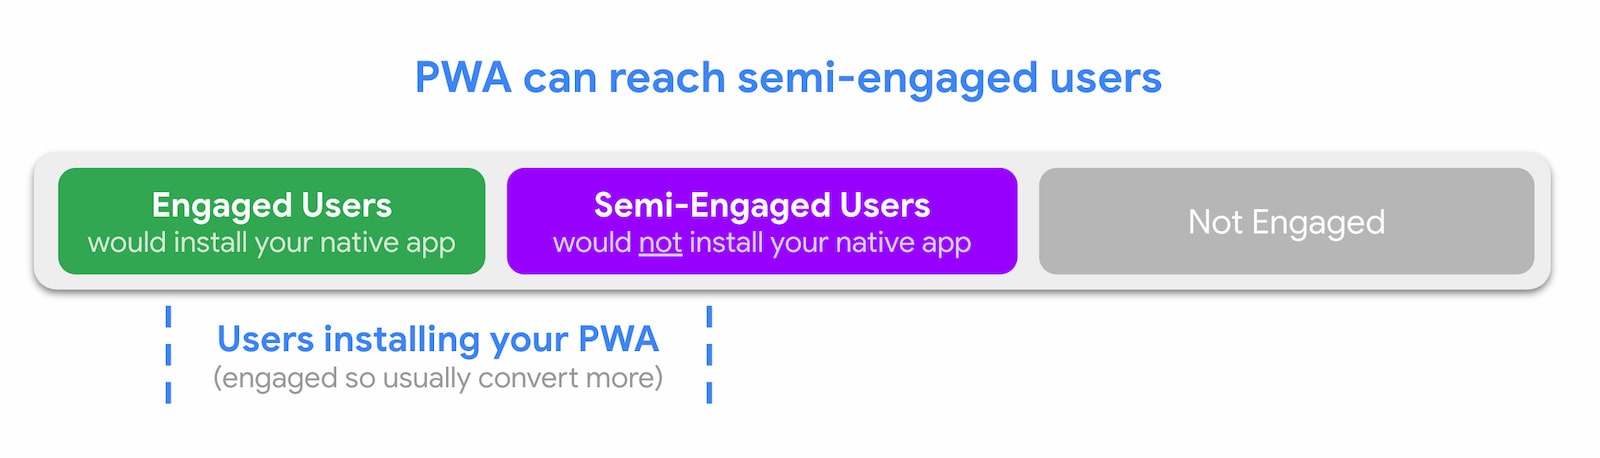 PWAs can reach semi-engaged users.